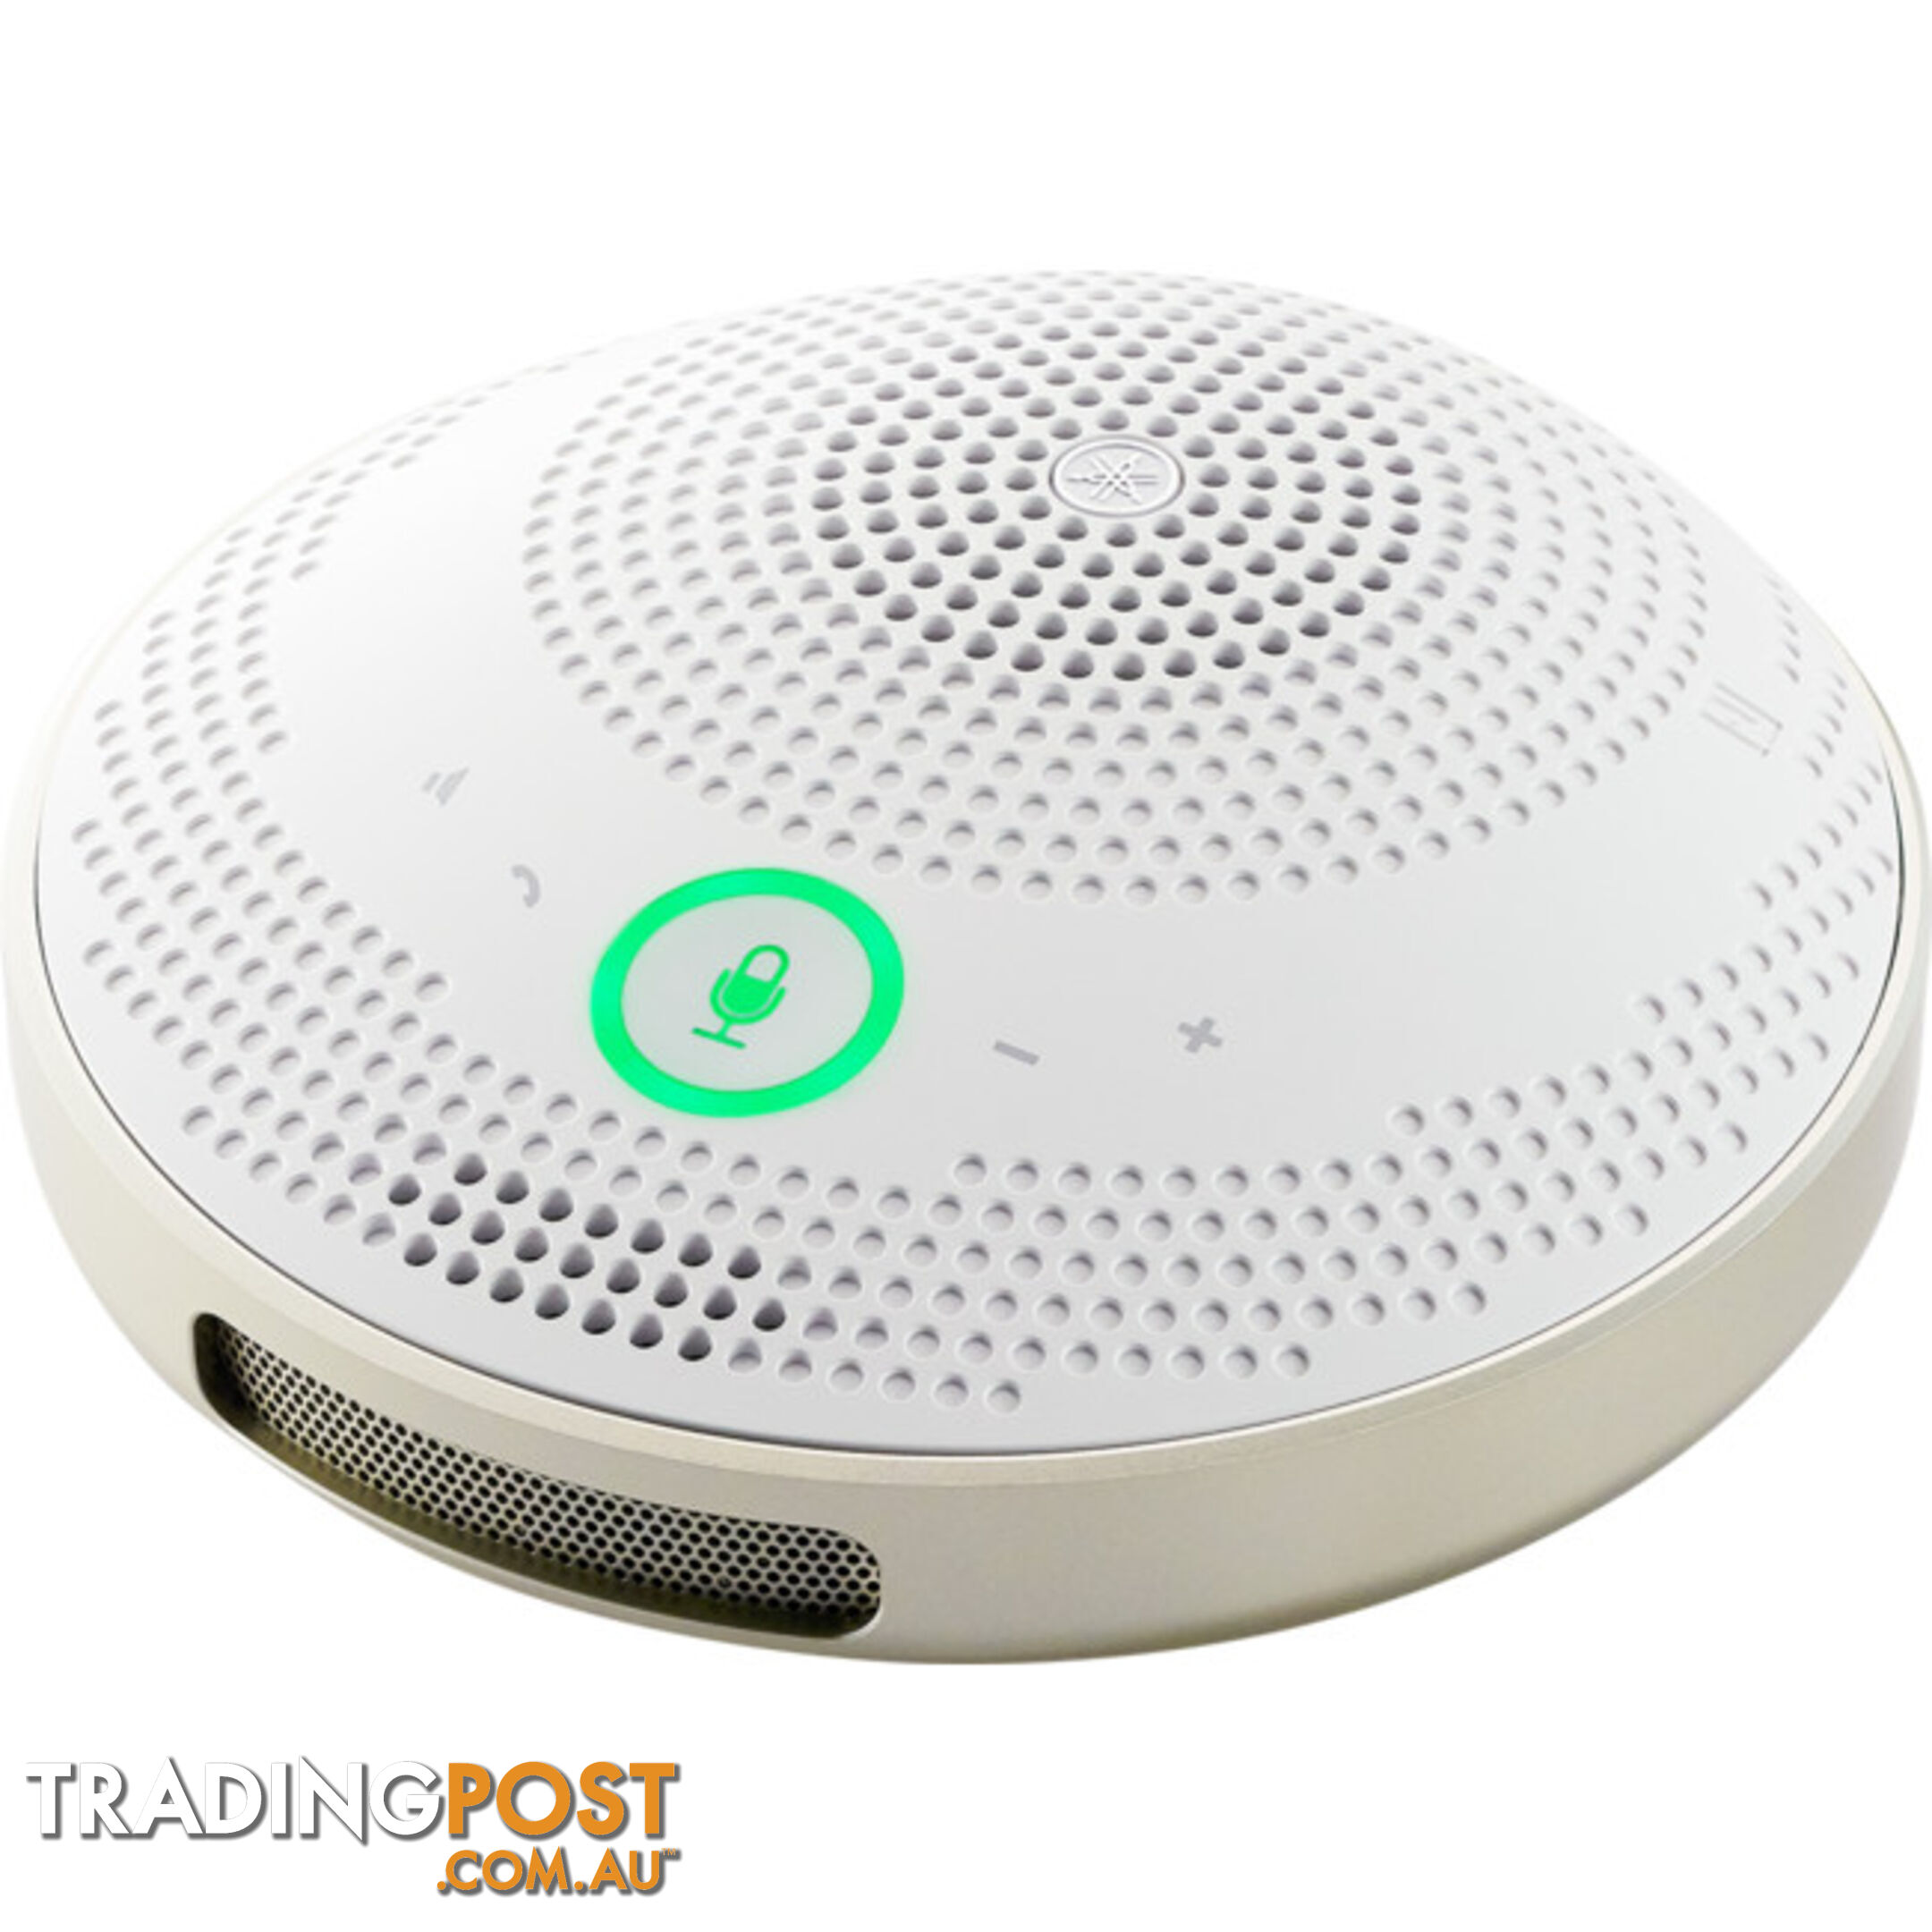 YVC200W PERSONAL- WORK FROM HOME CONFERENCE ADECIA SPEAKERPHONE - WHITE